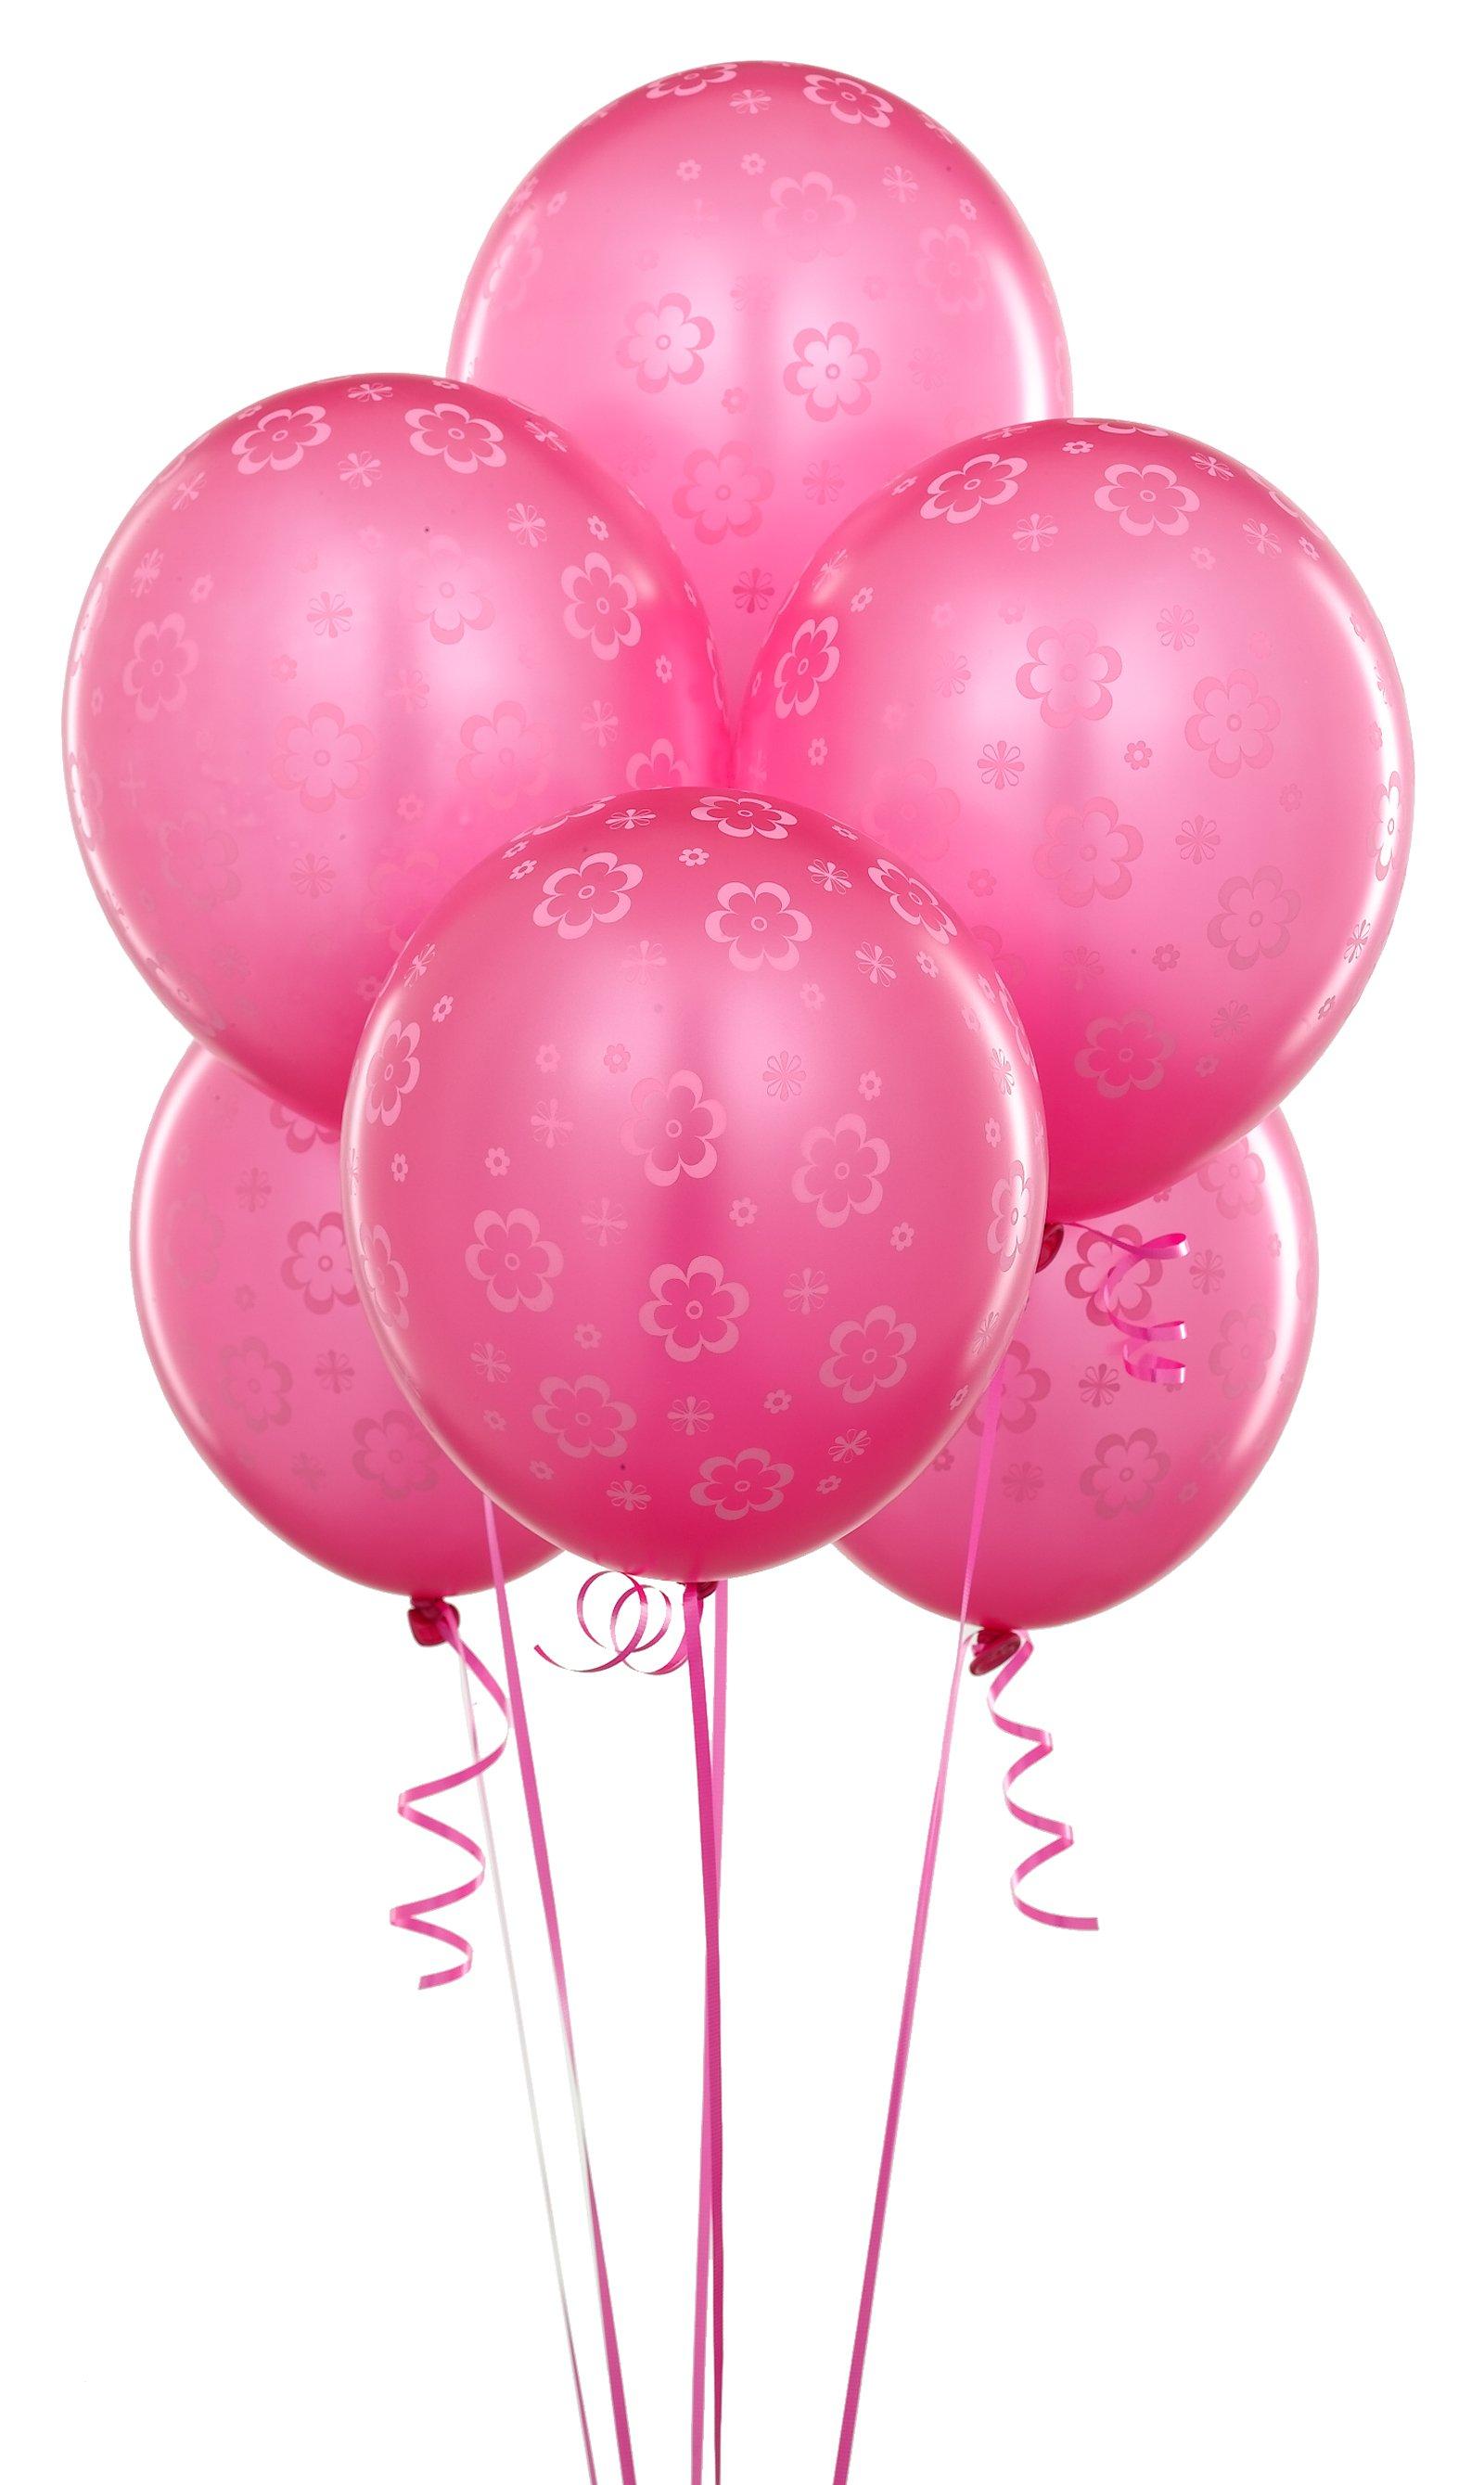 Pink Flowers and Balloons